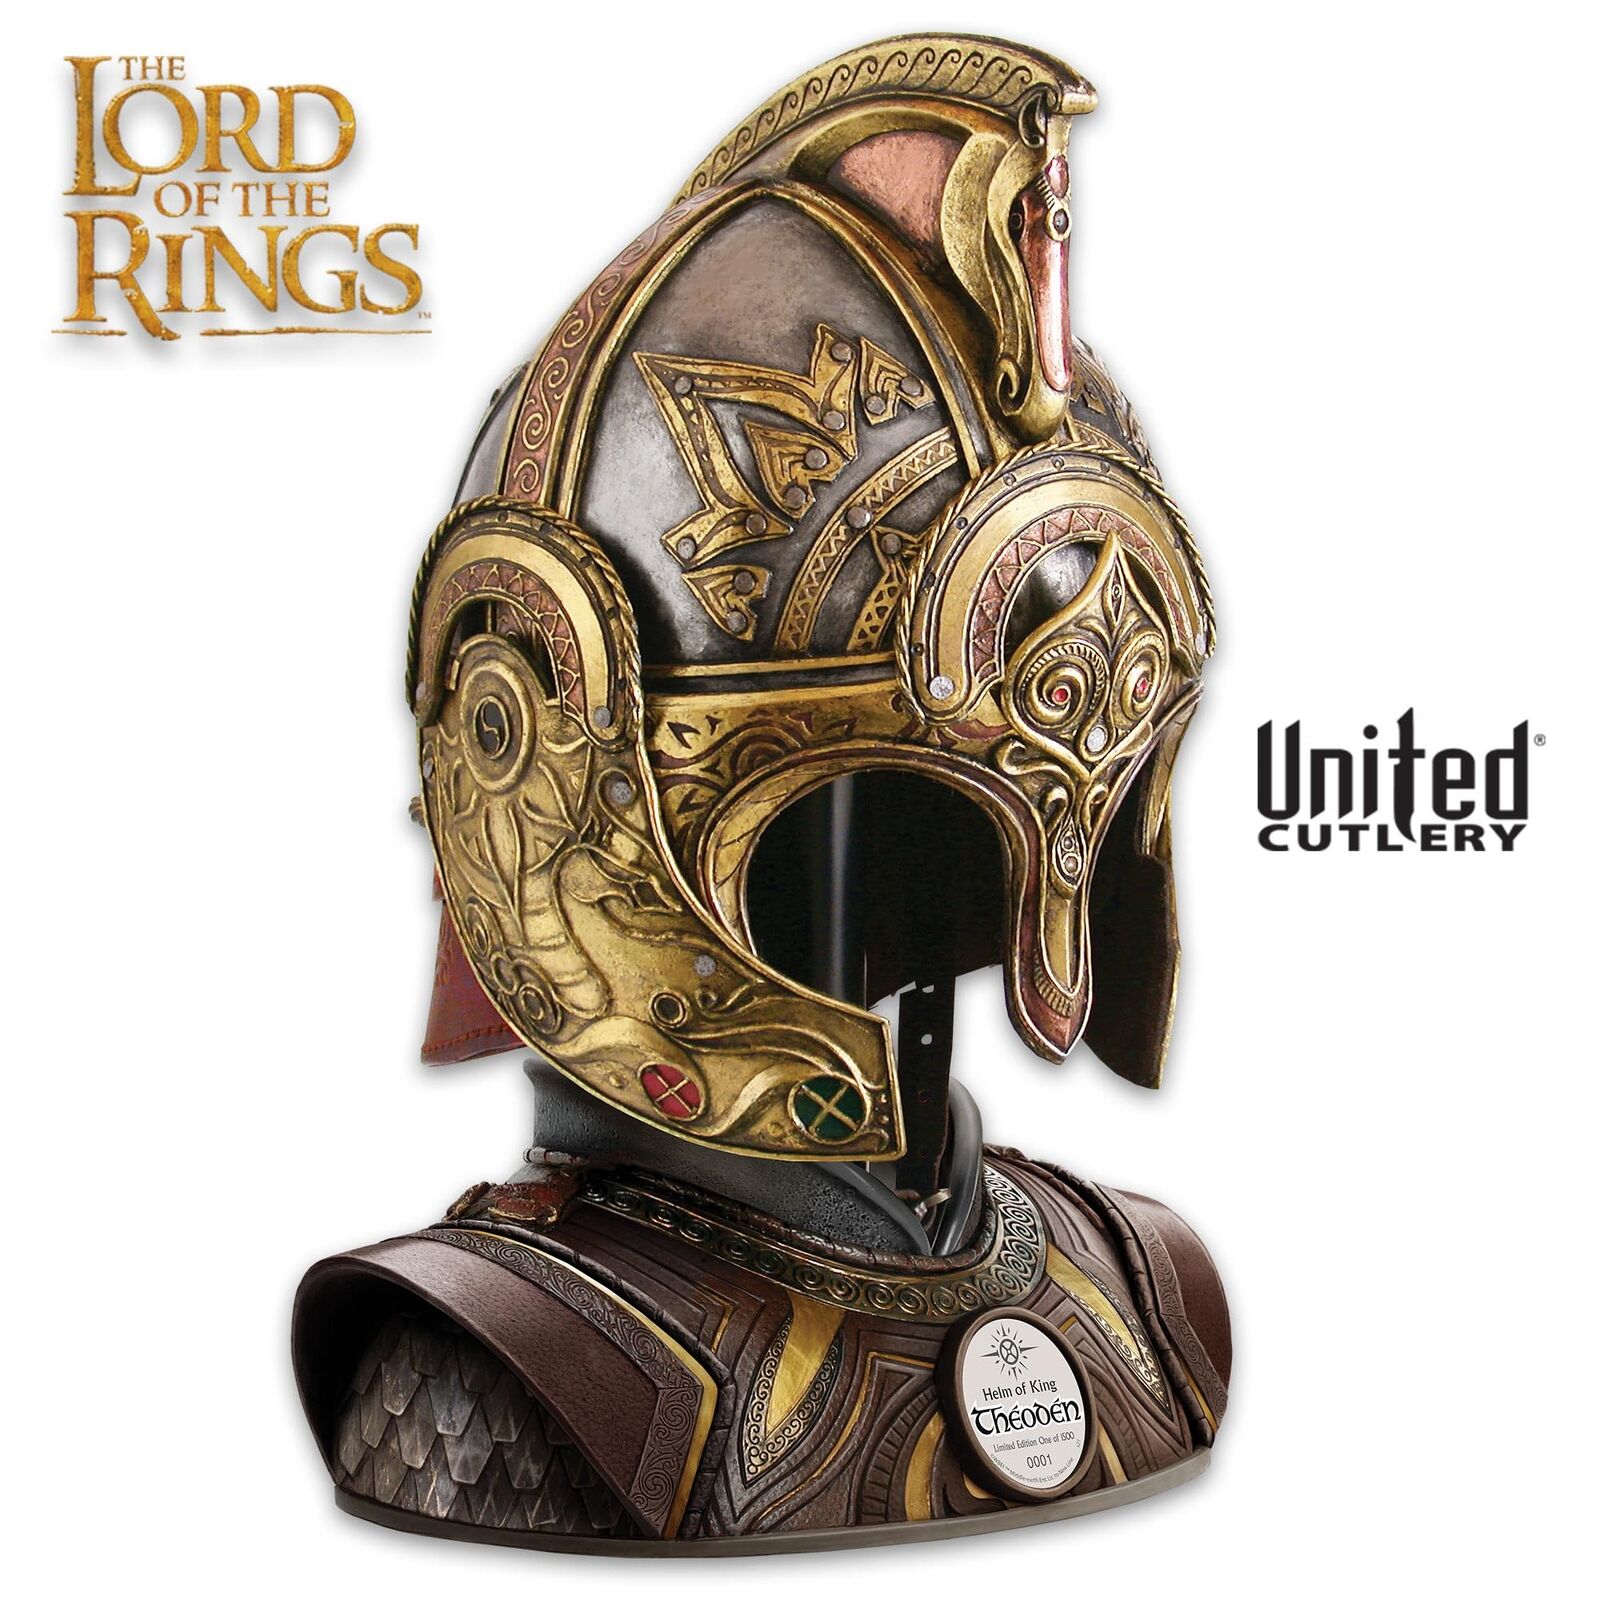 Helm Of King Theoden - LOTR of the Rings Replica Officially Licensed Collectible